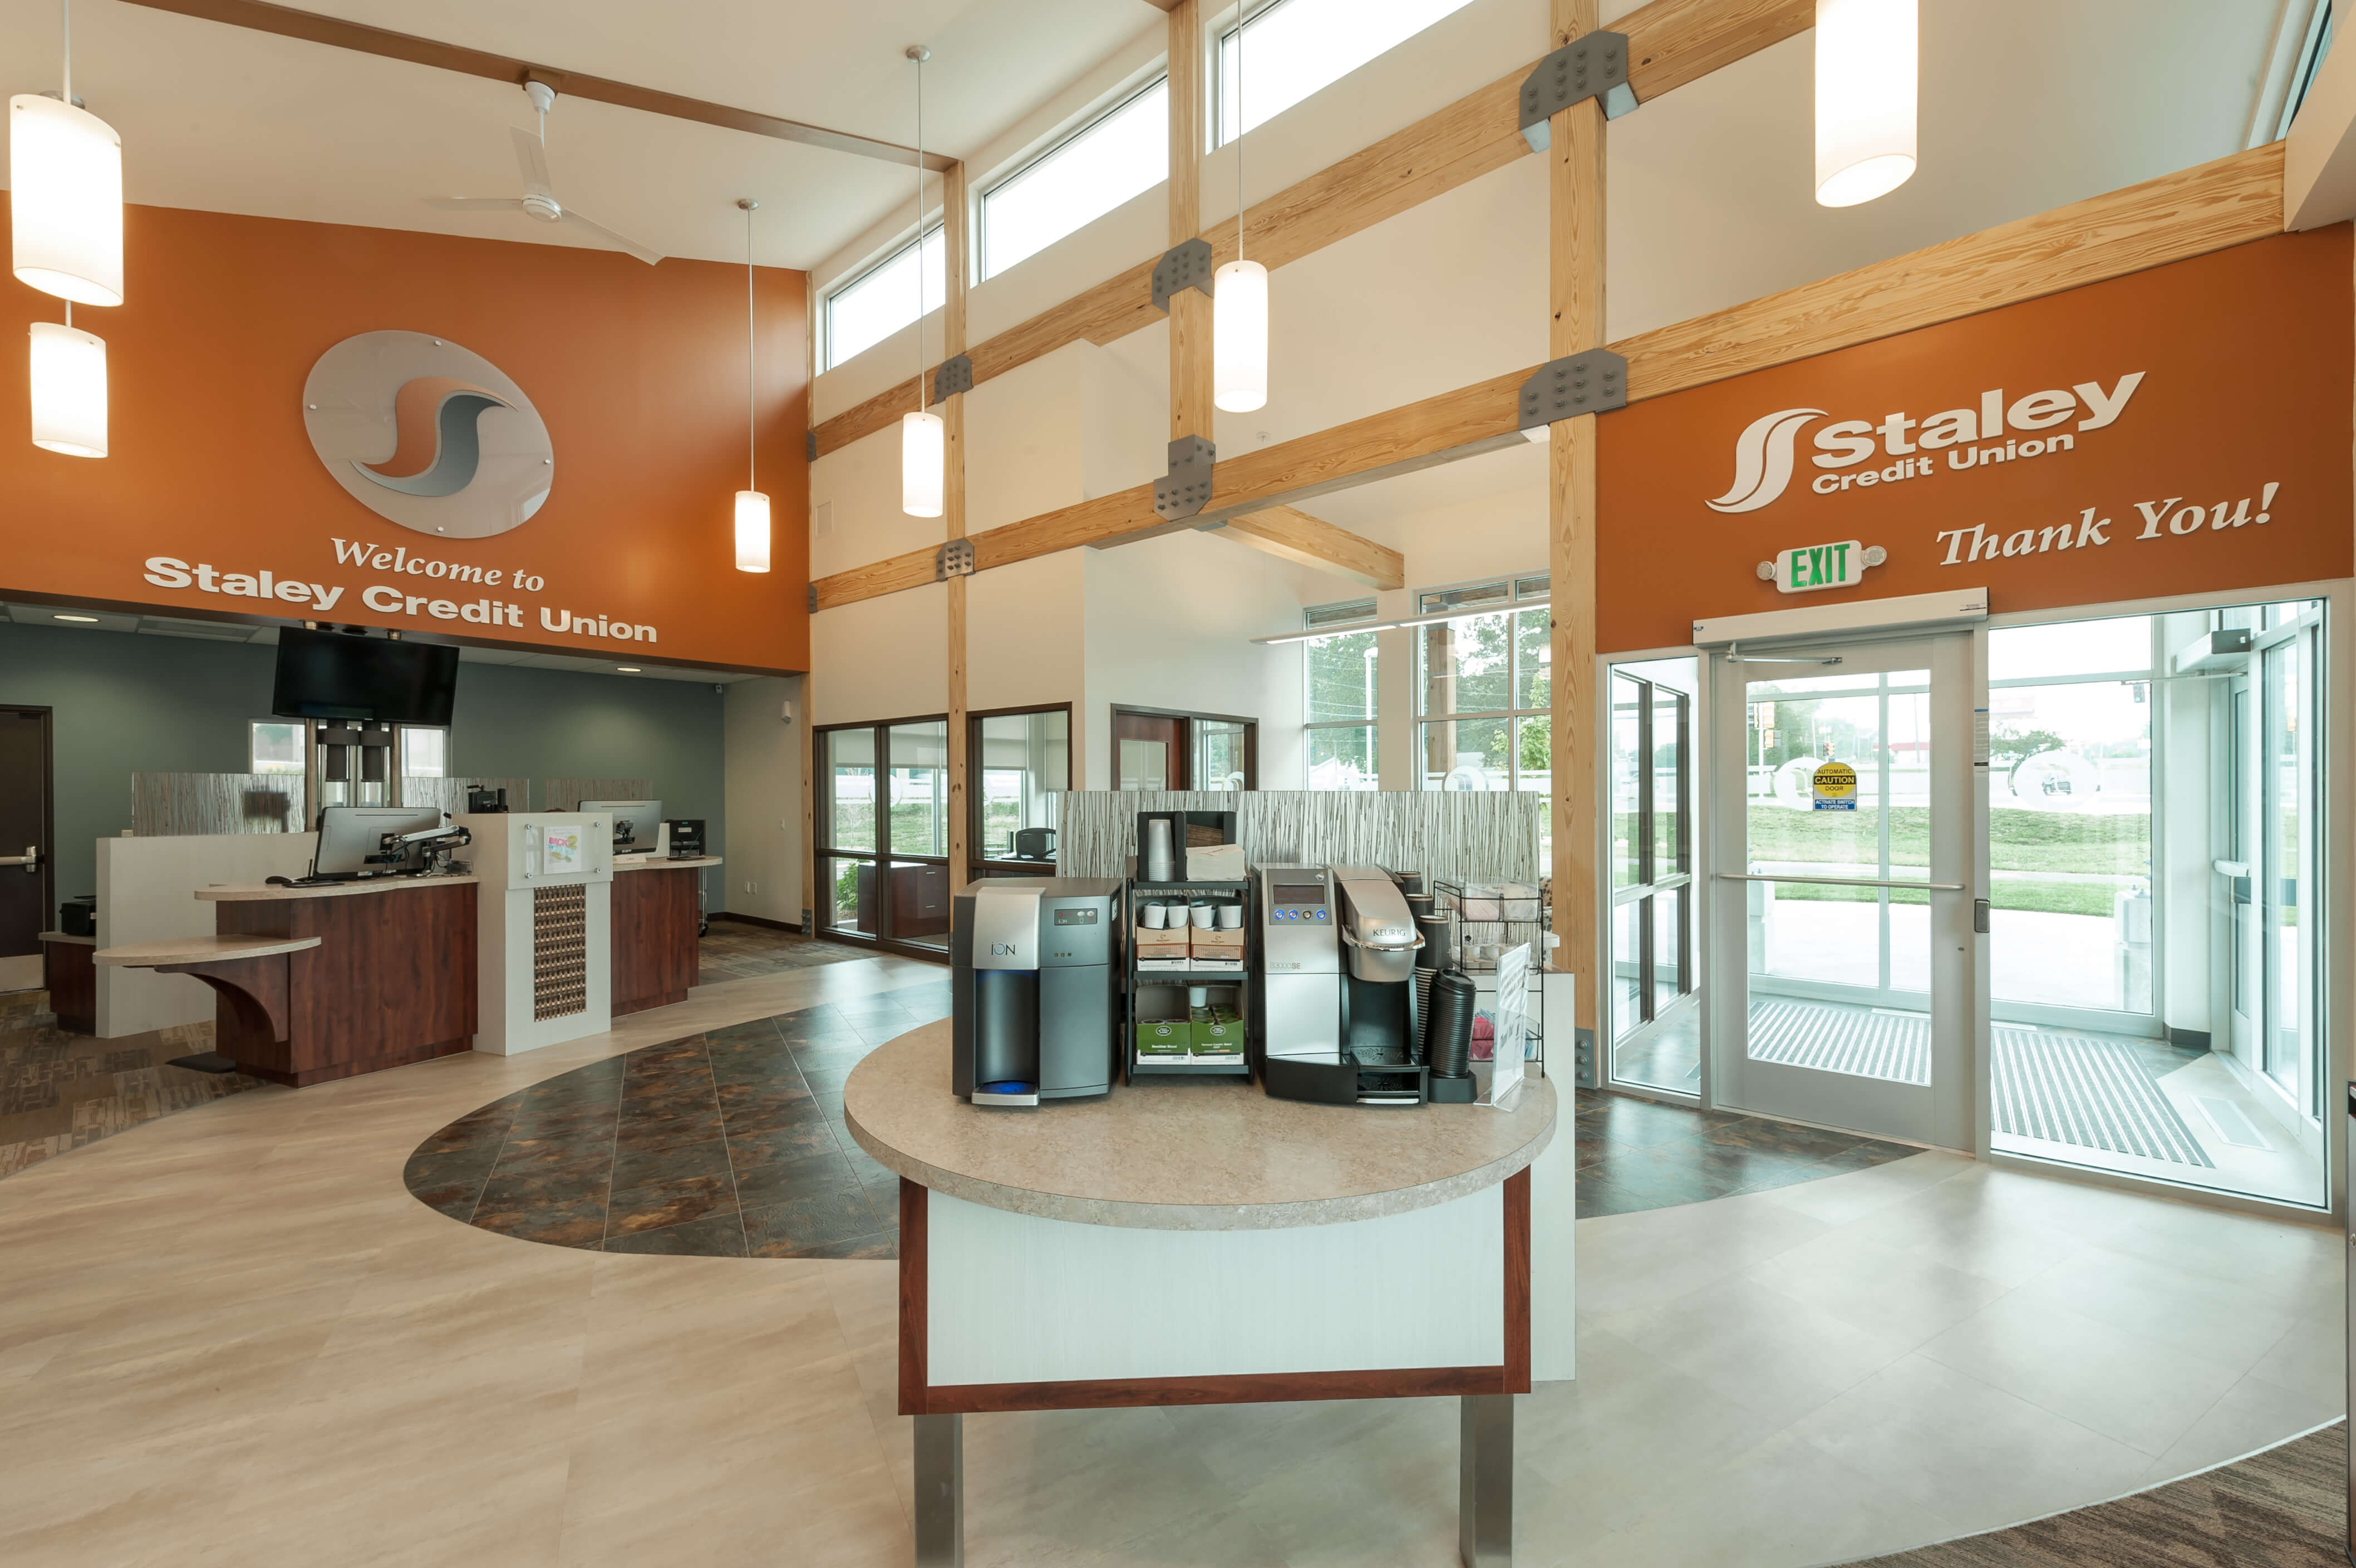 Interior lobby space of Staley Credit Union